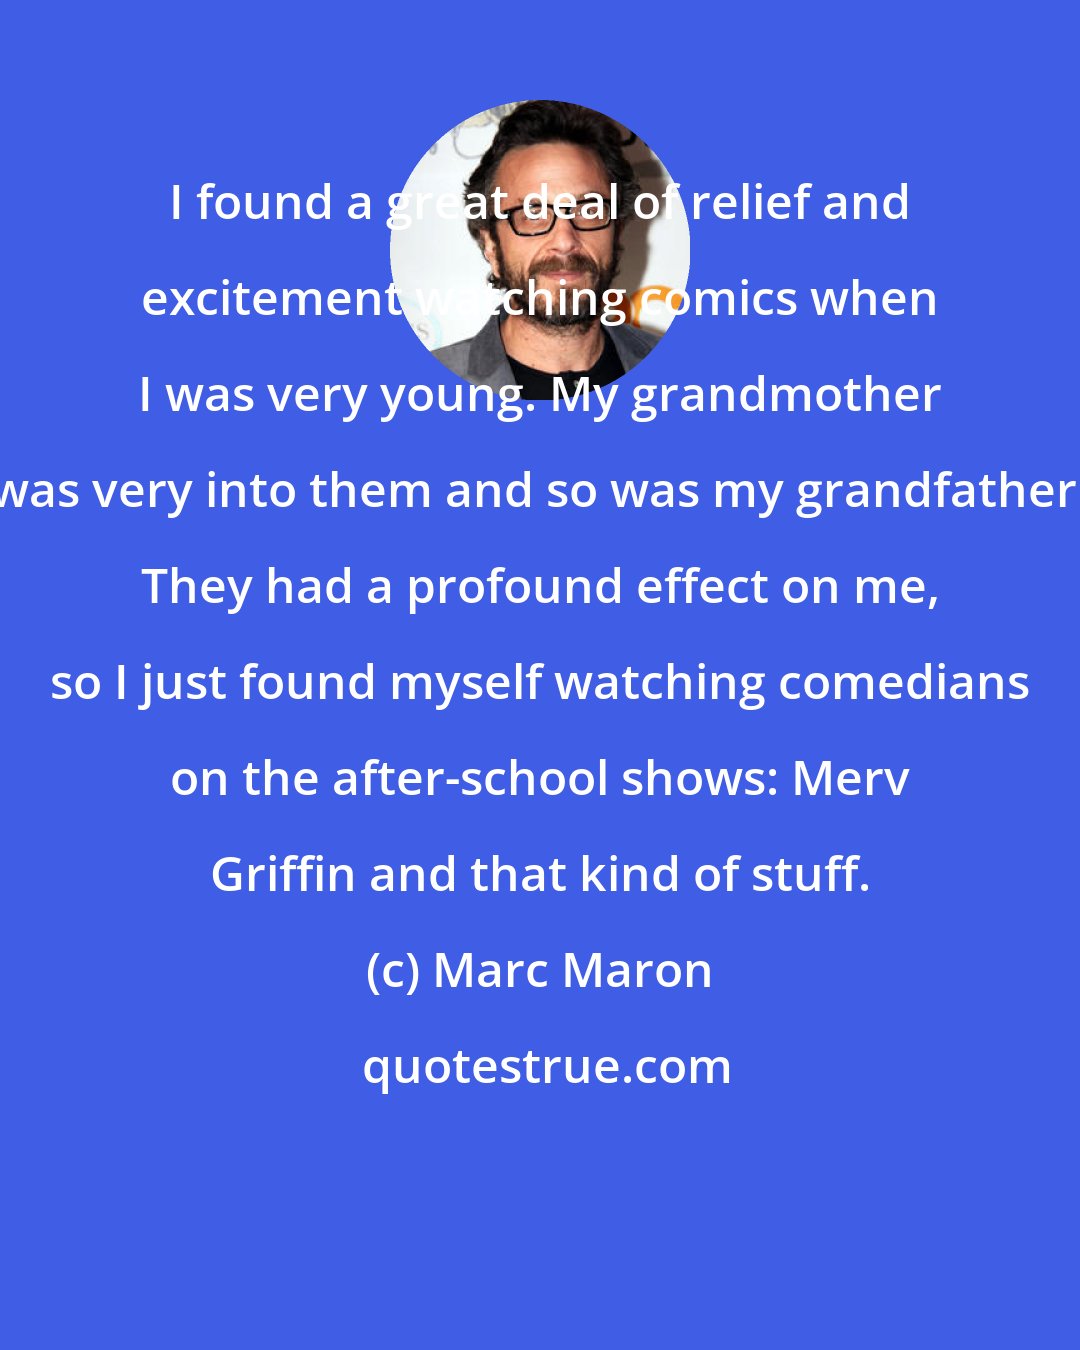 Marc Maron: I found a great deal of relief and excitement watching comics when I was very young. My grandmother was very into them and so was my grandfather. They had a profound effect on me, so I just found myself watching comedians on the after-school shows: Merv Griffin and that kind of stuff.